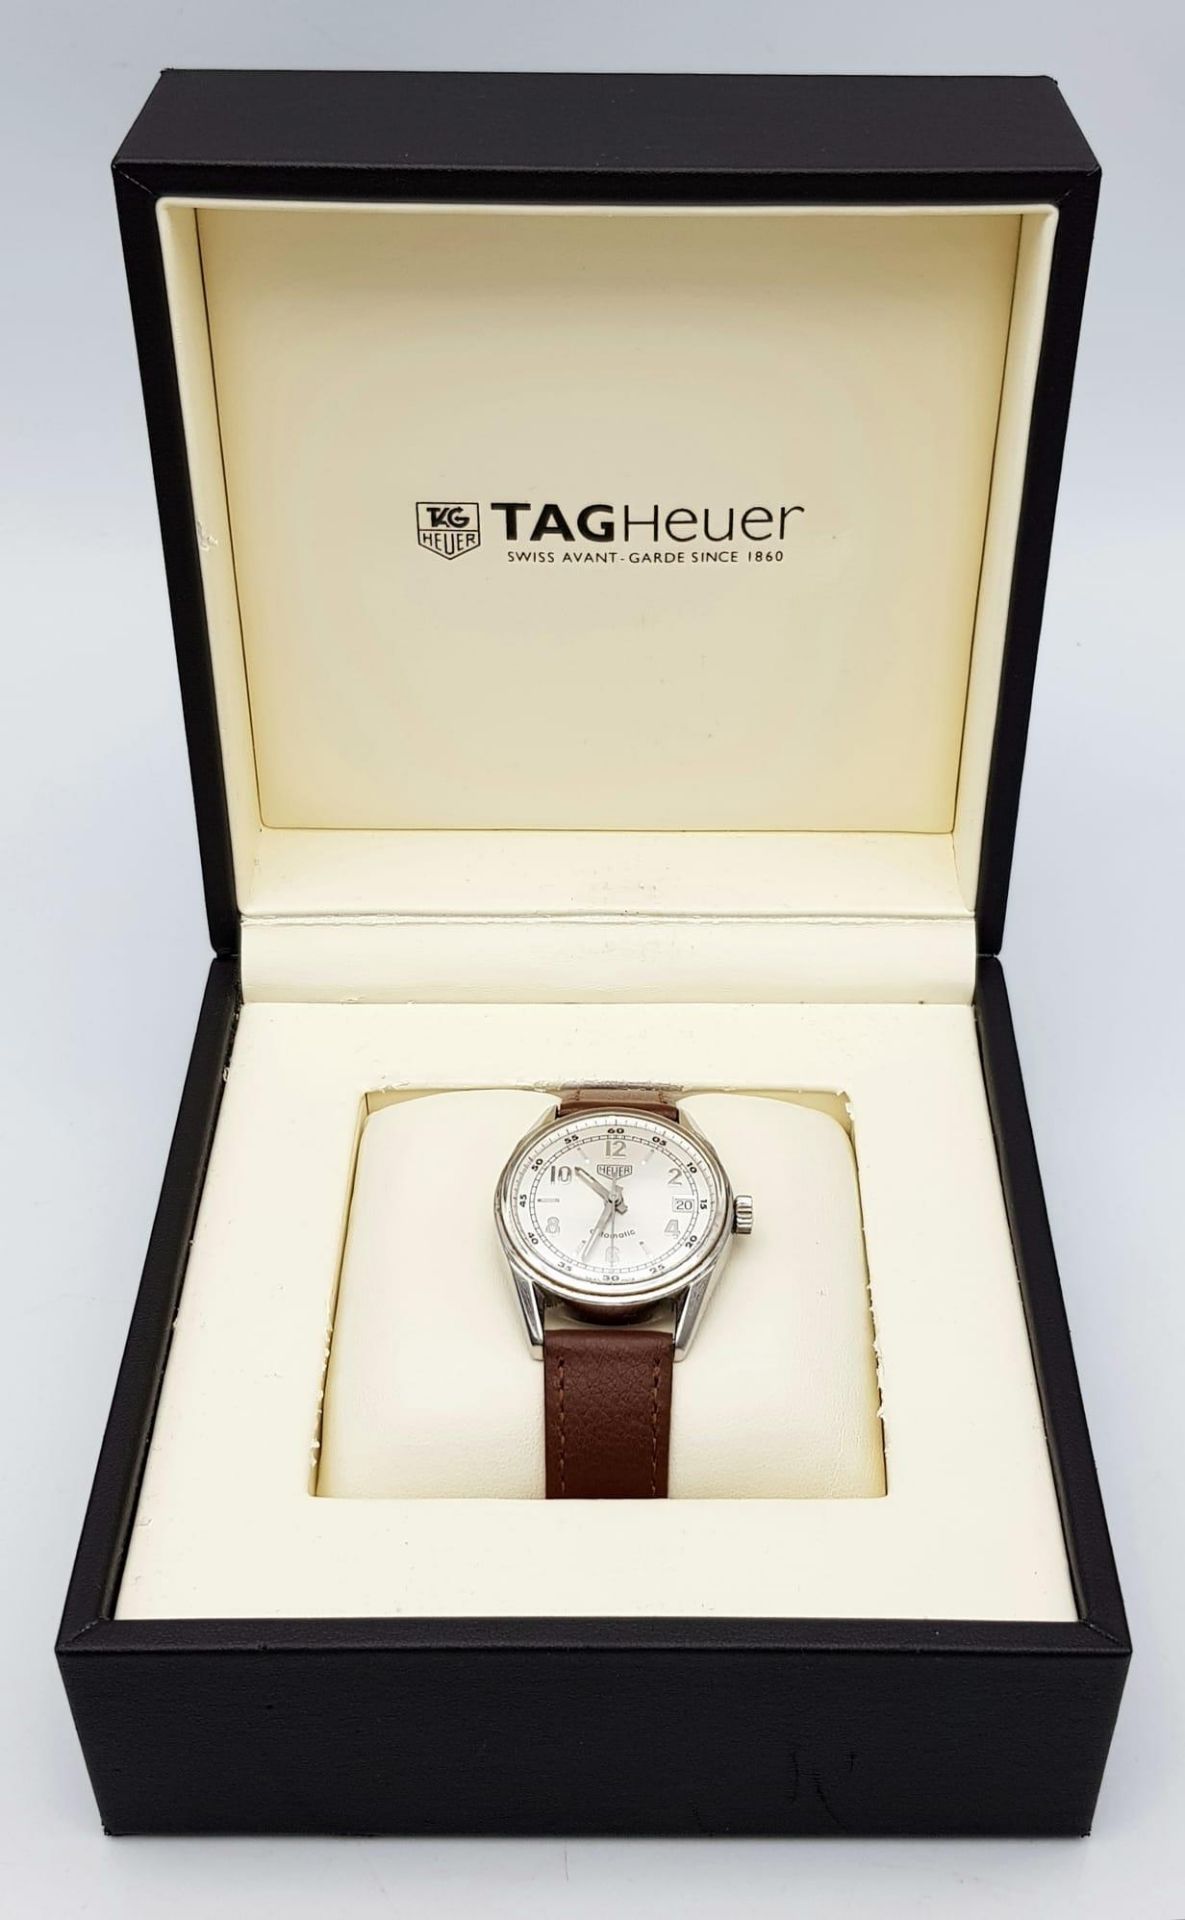 A Tag Heuer Automatic Gents Watch. Brown leather strap. Stainless steel case - 36mm. Silver tone - Image 6 of 7